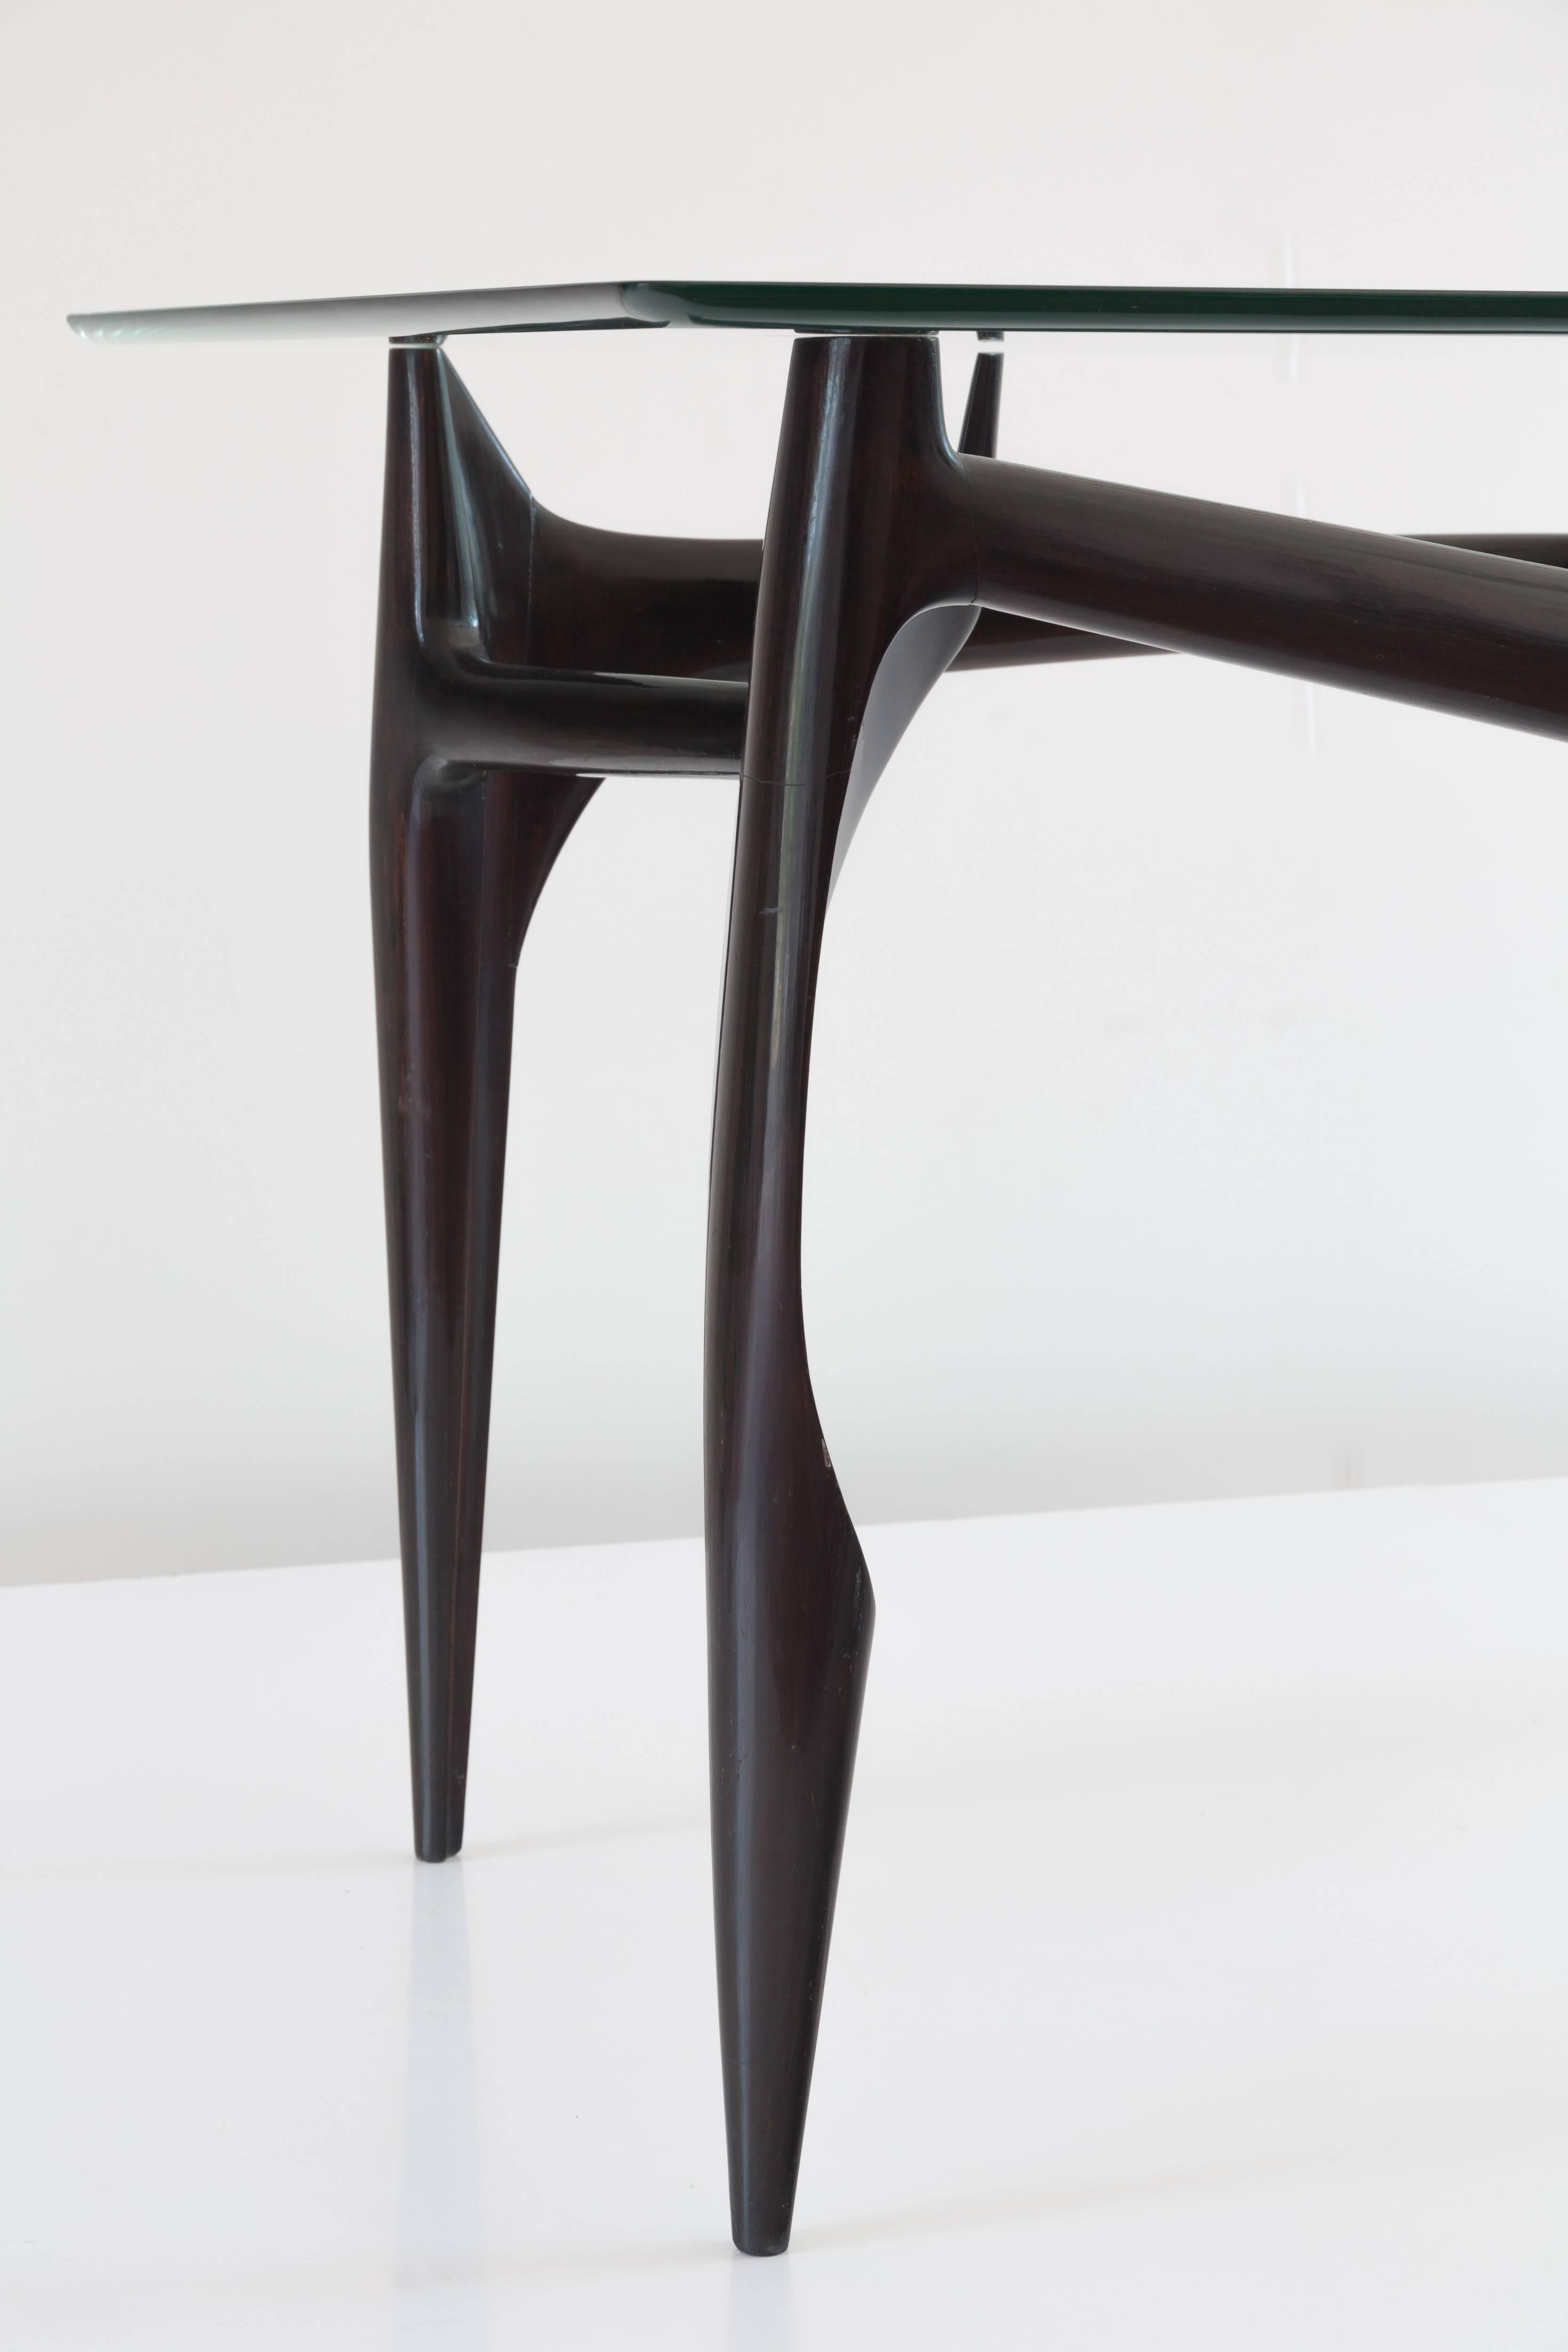 Italian Important and Sculptural Unique Ico Parisi and Fontana Arte Dining Table, 1950 For Sale